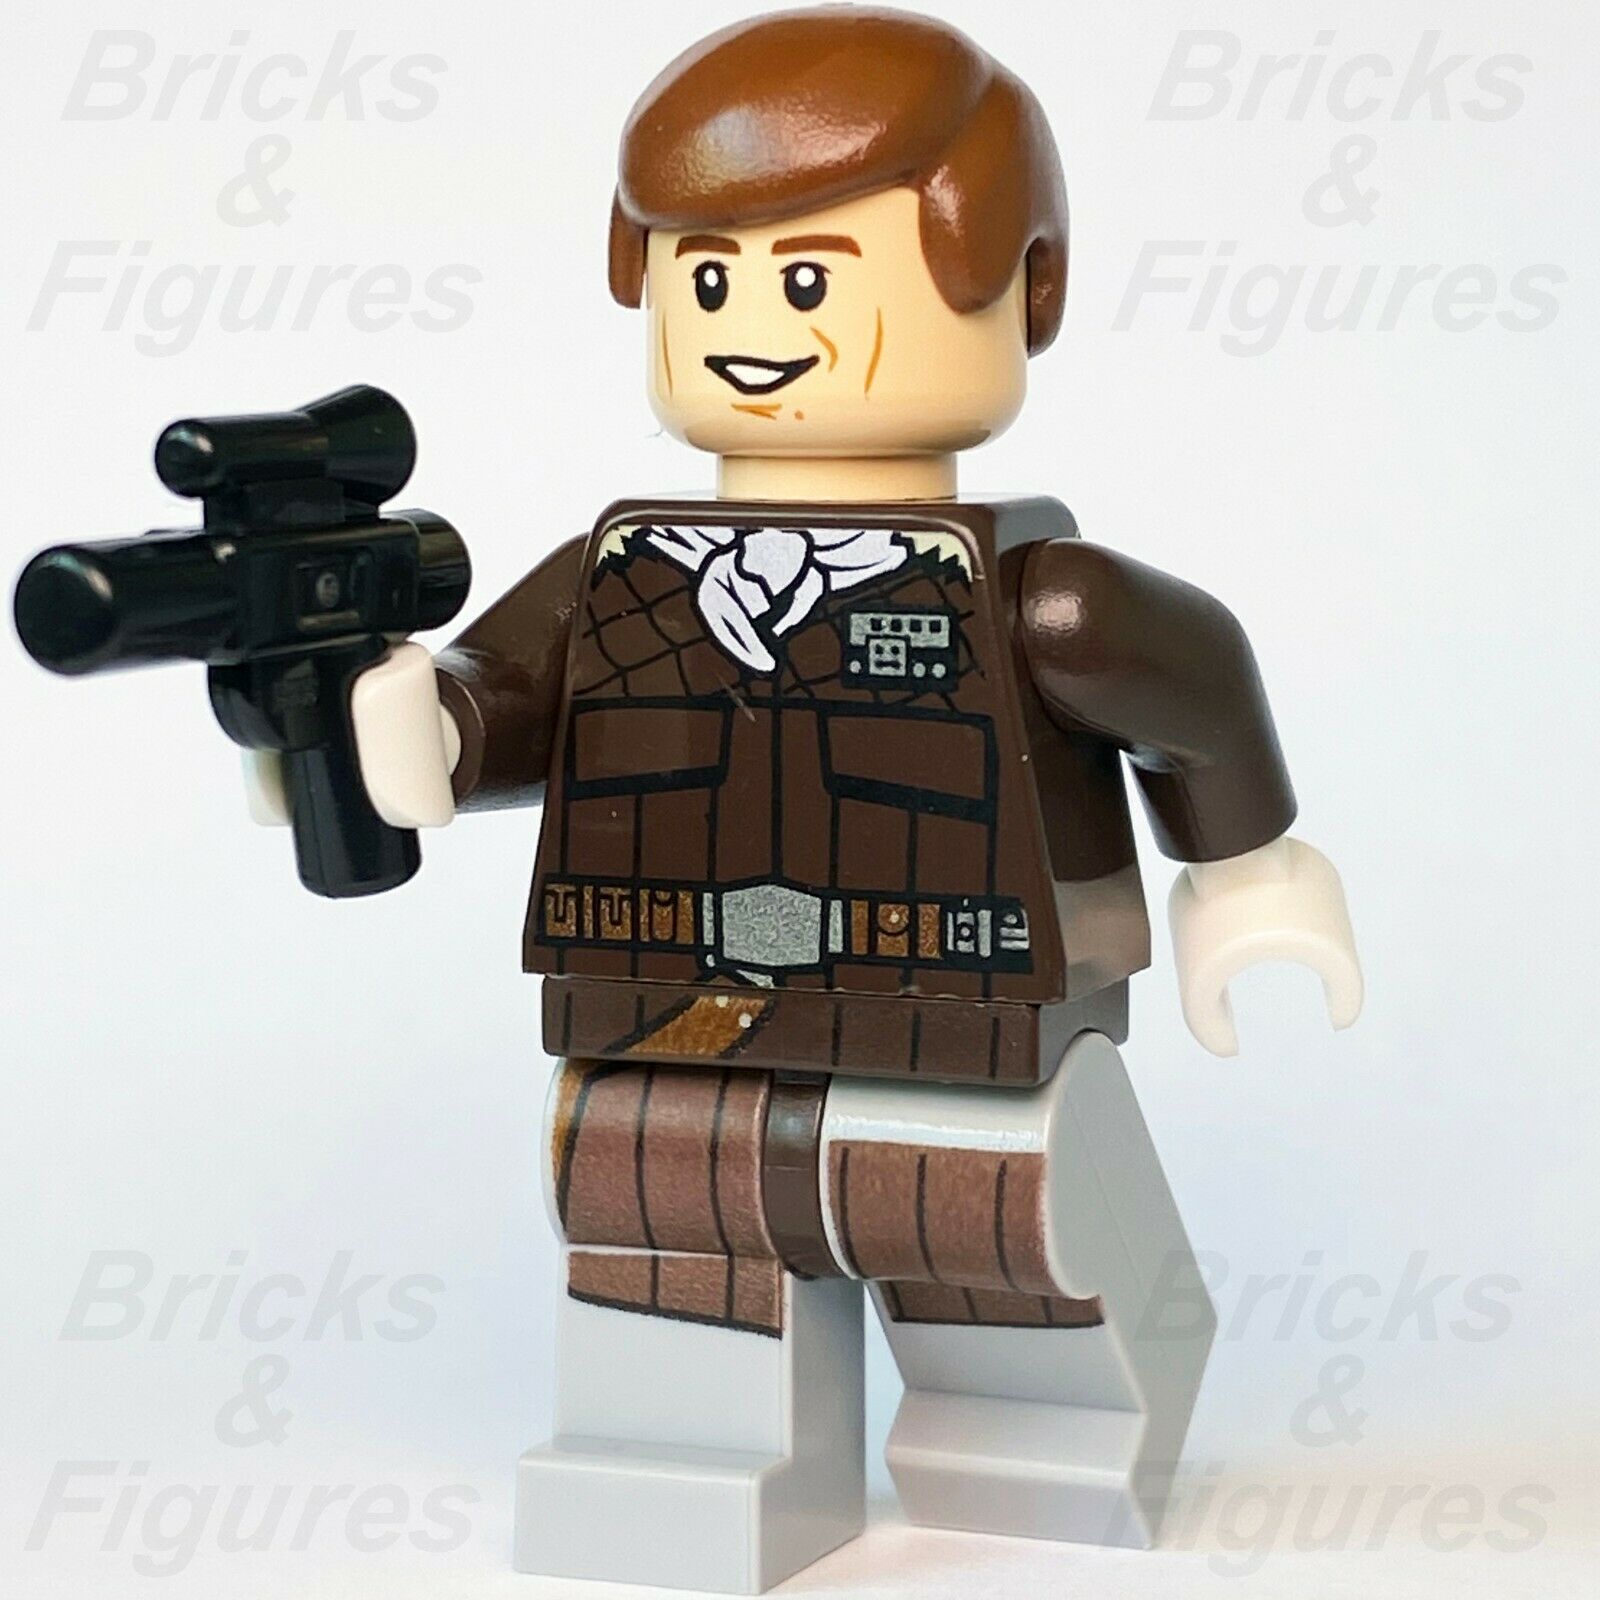 New Star Wars LEGO Han Solo Rebel Alliance Hoth Outfit Minifigure 75098 - Bricks & Figures